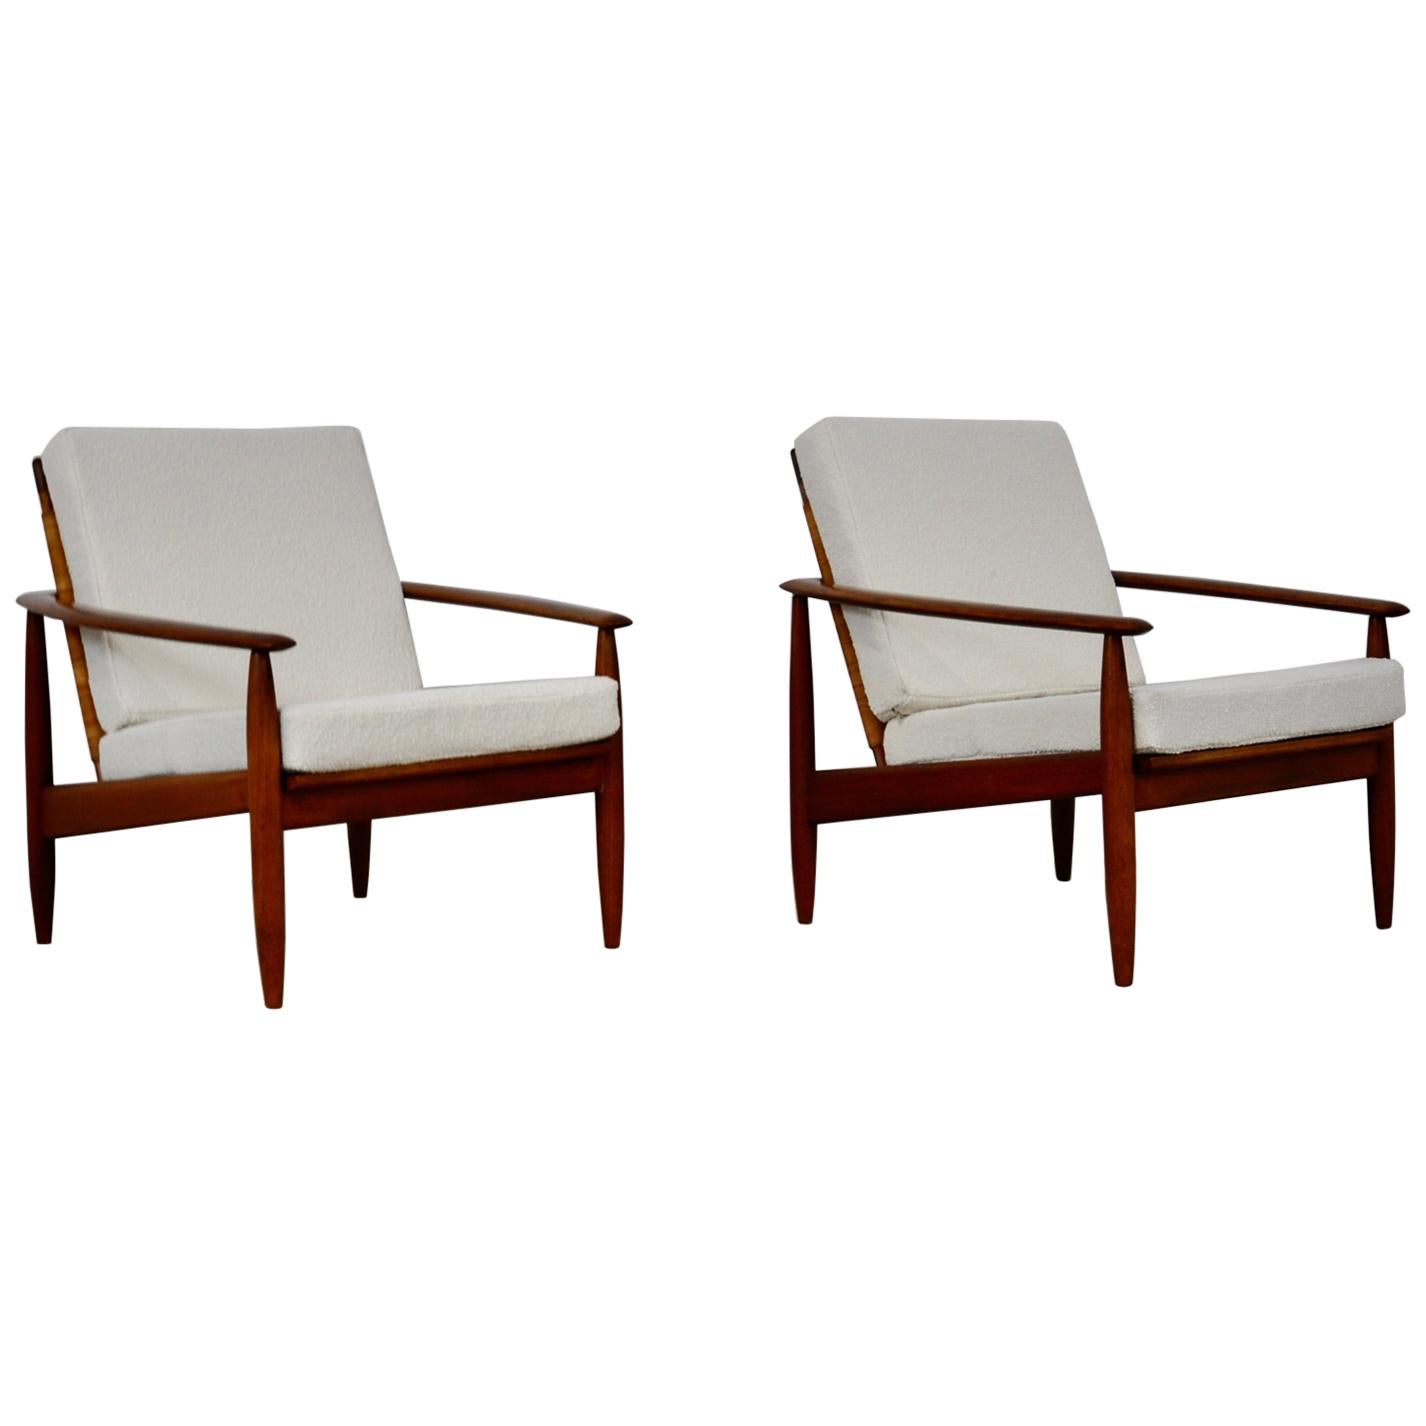 Pair of Lounge Chair, 1950s